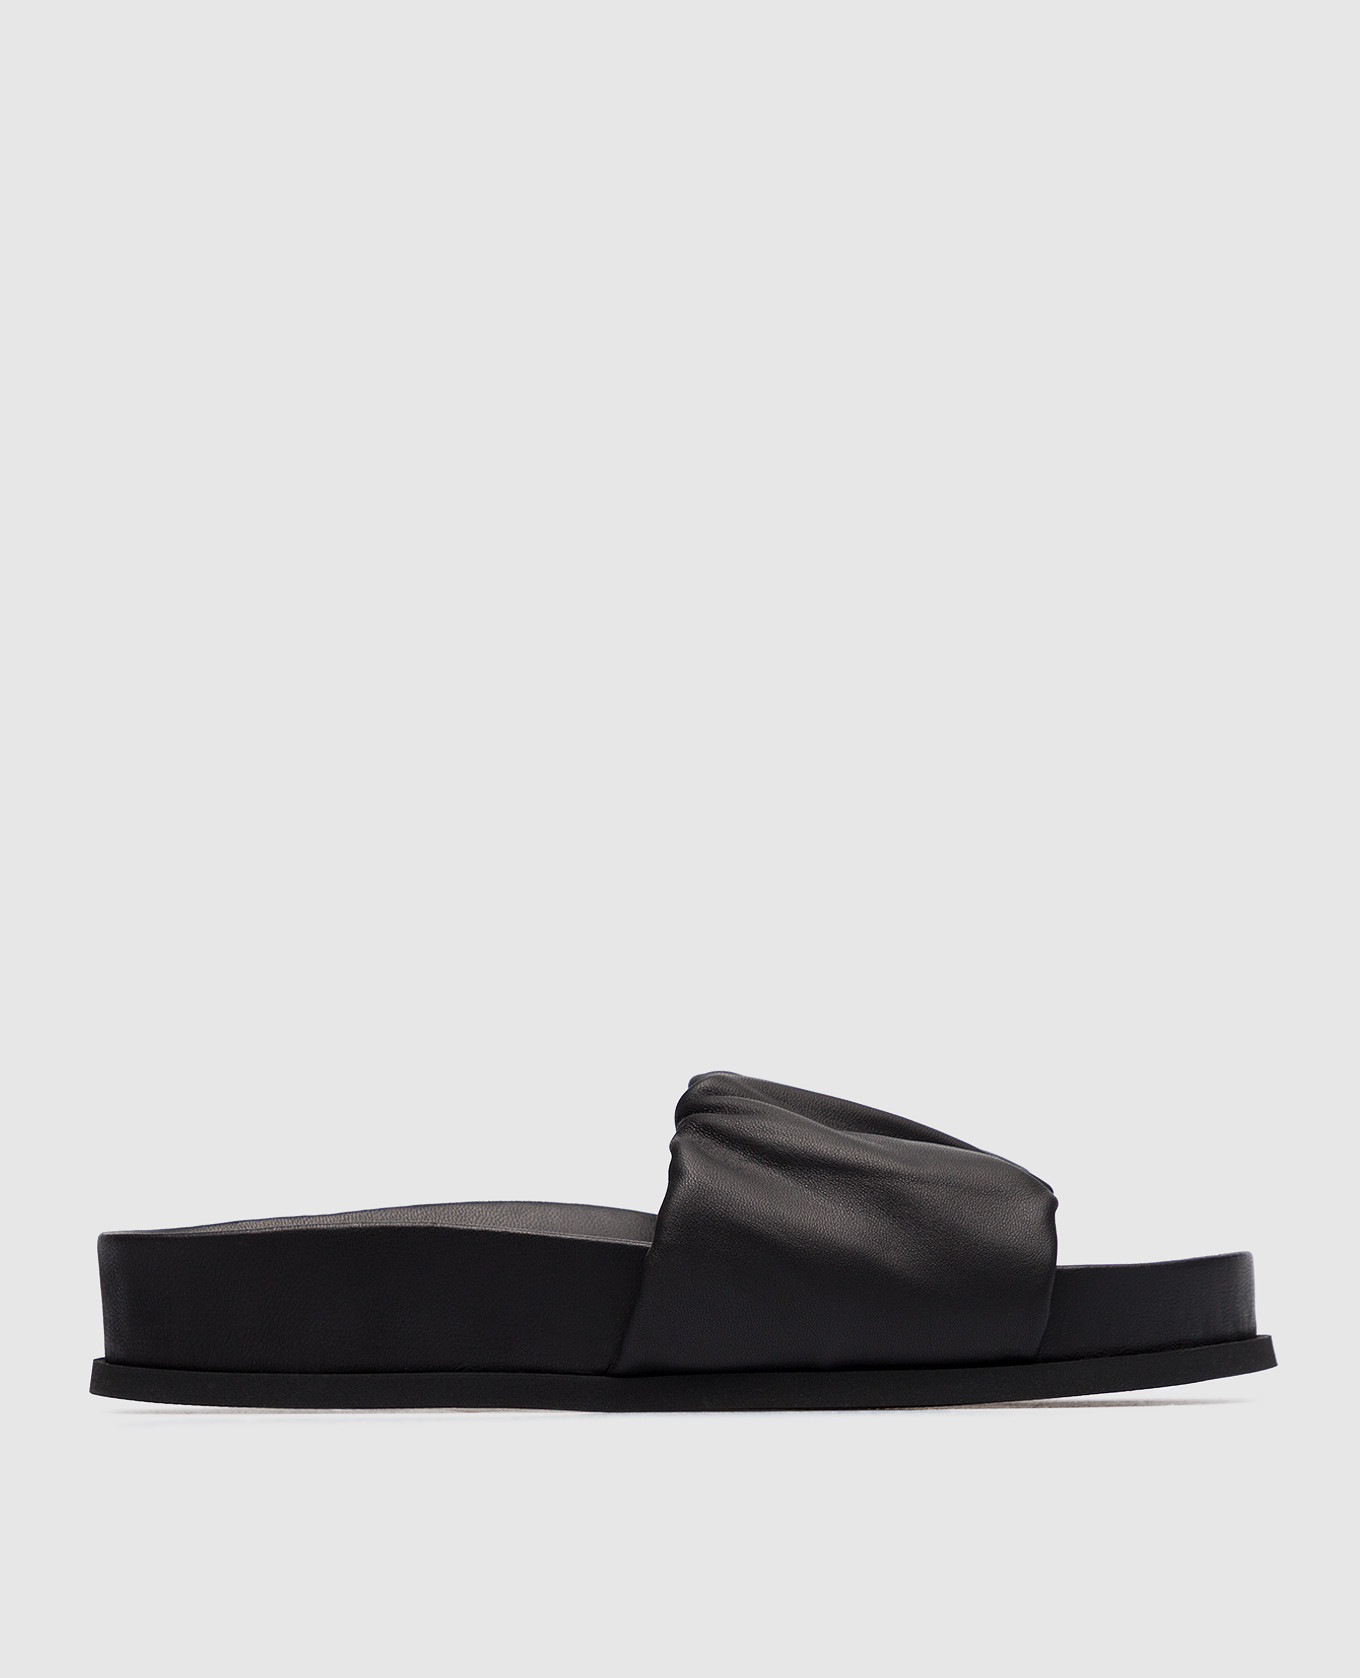 Marcella Black Leather Draped Slippers